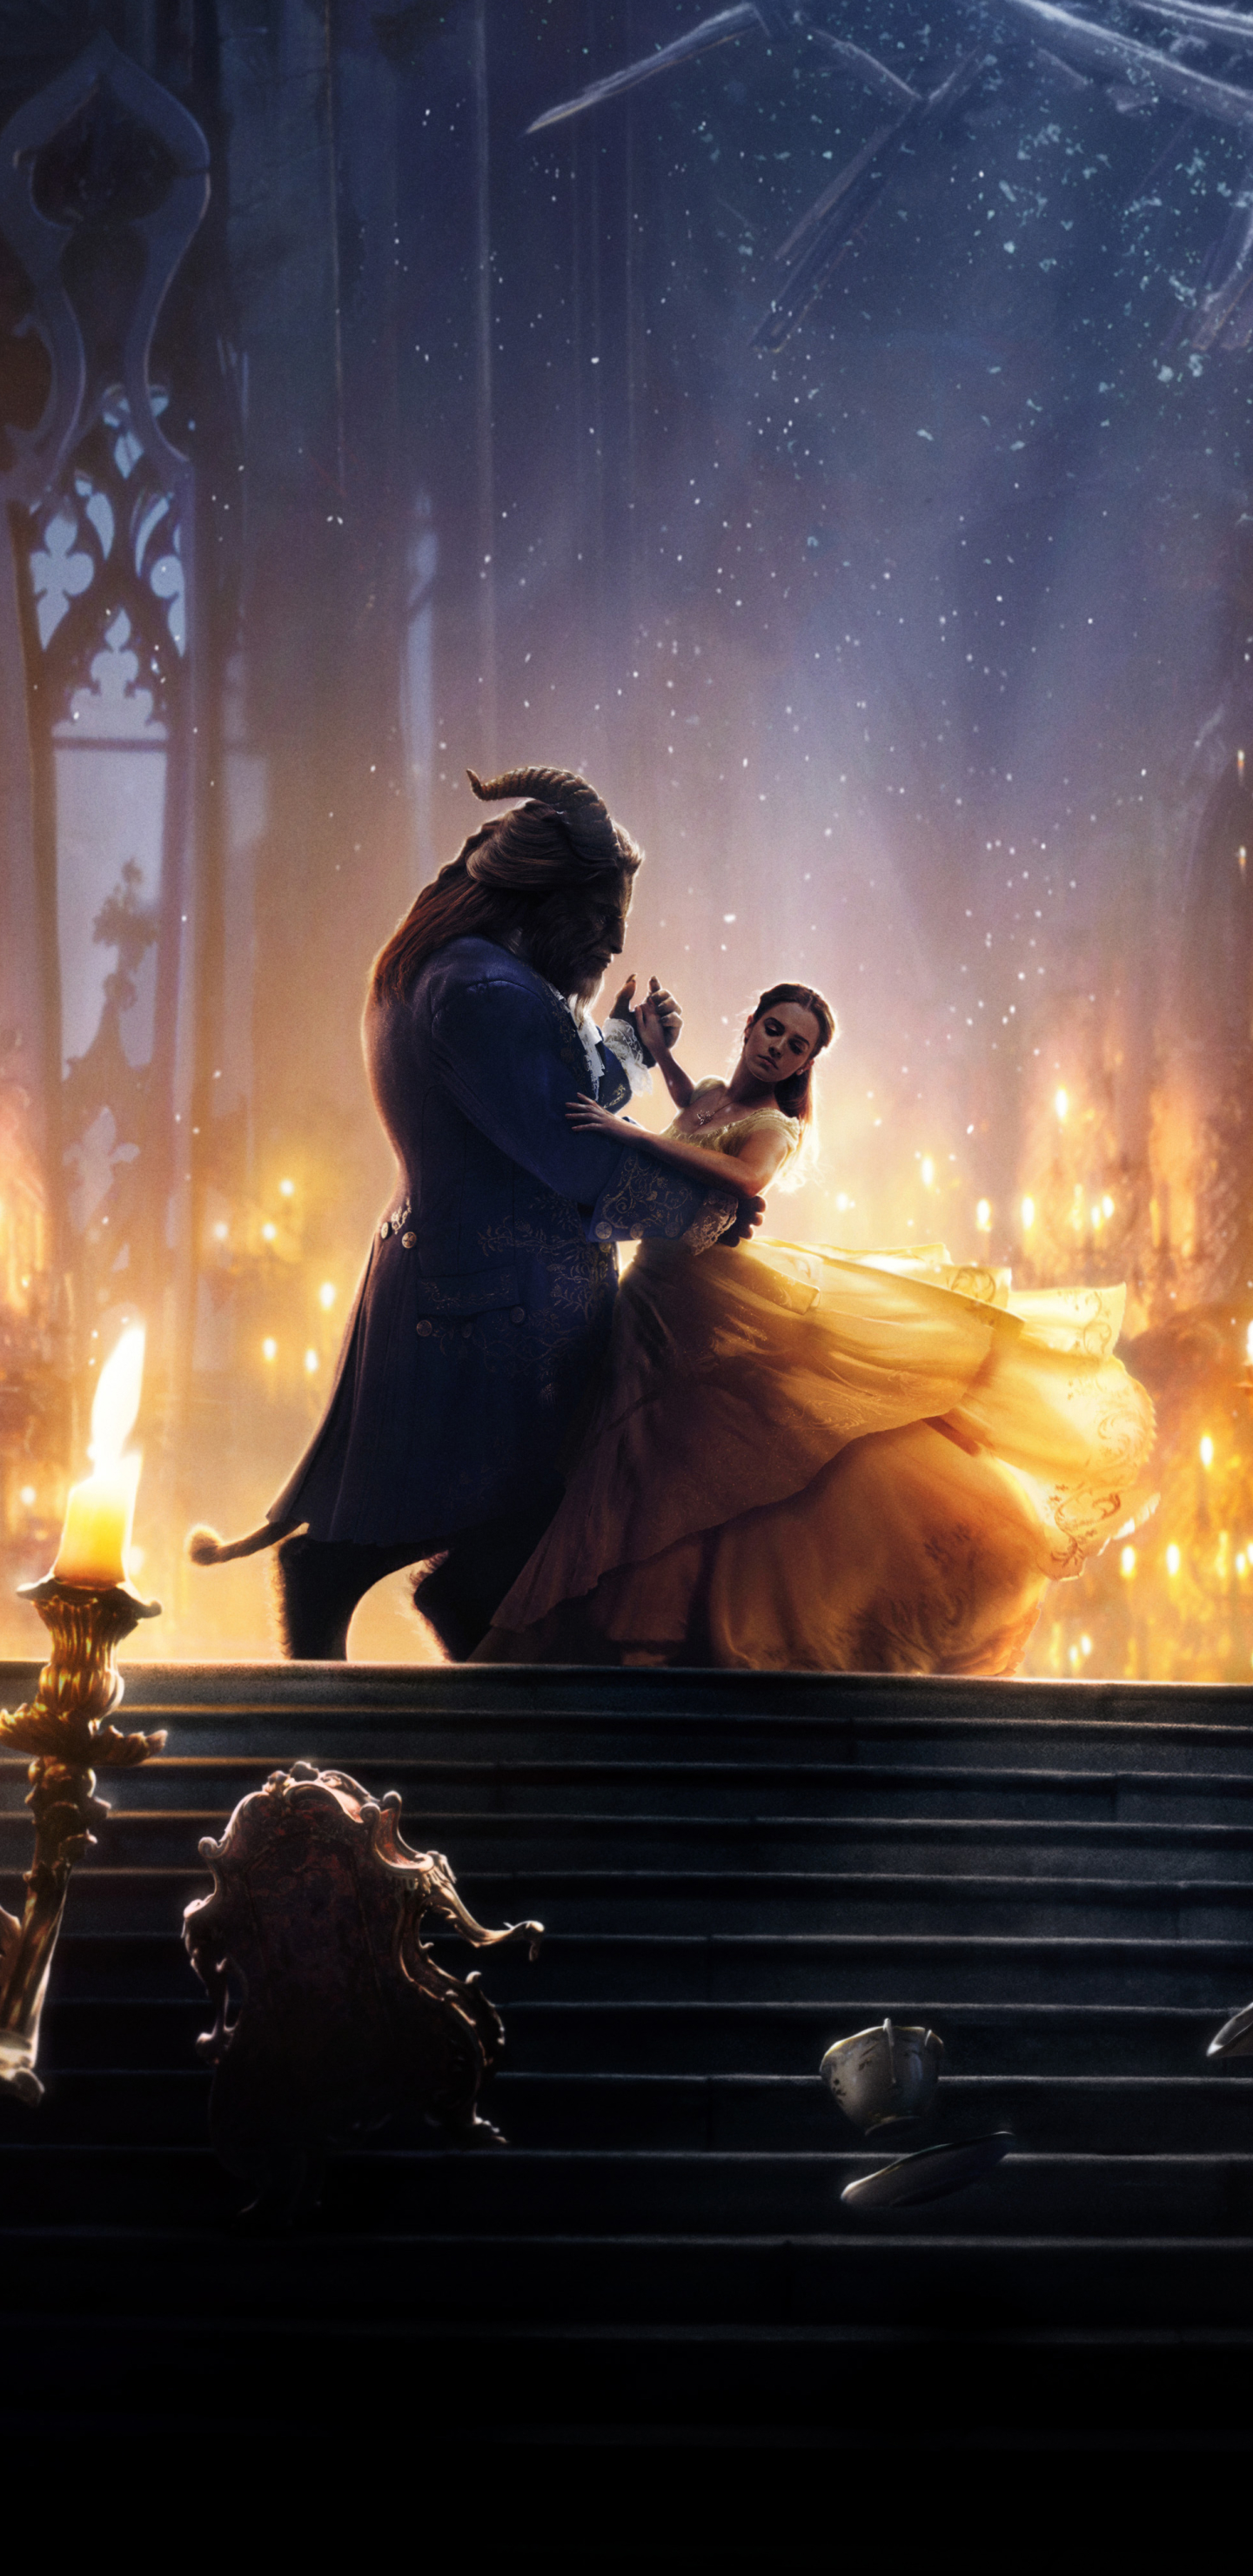 Beauty And The Beast (2017) Phone Wallpaper